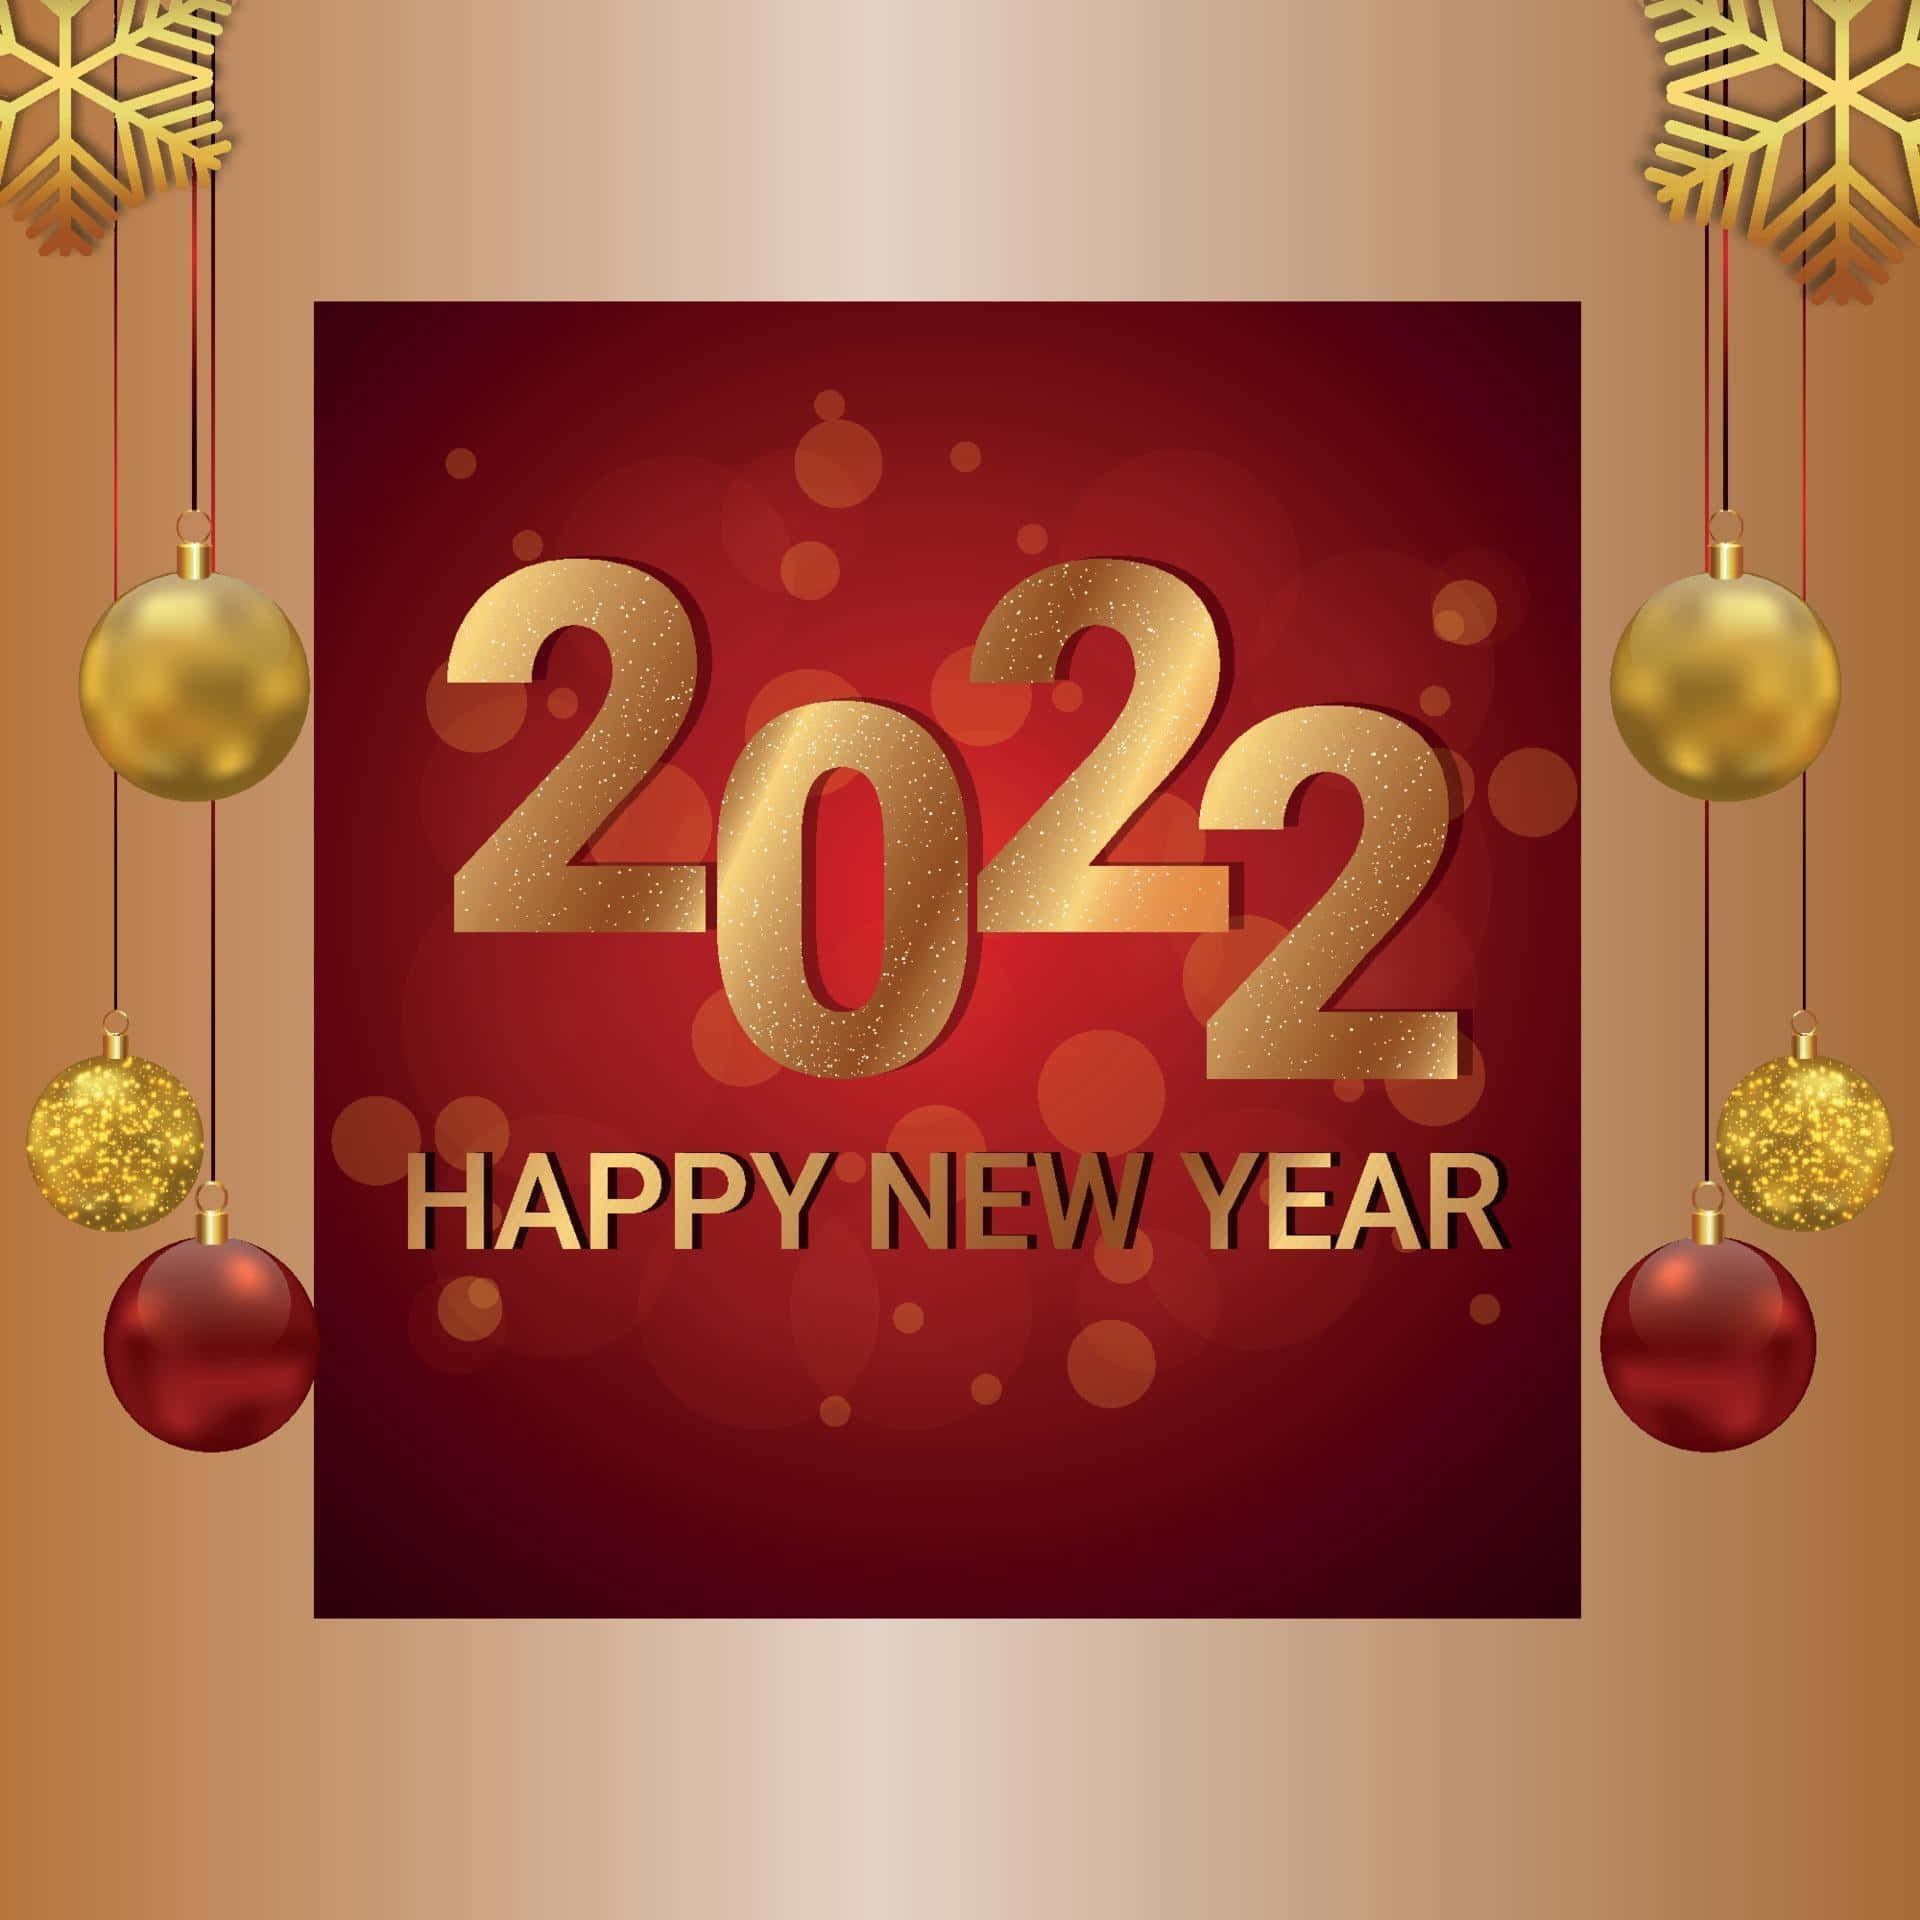 Happy New Year 2020 With Golden Numbers And Ornaments